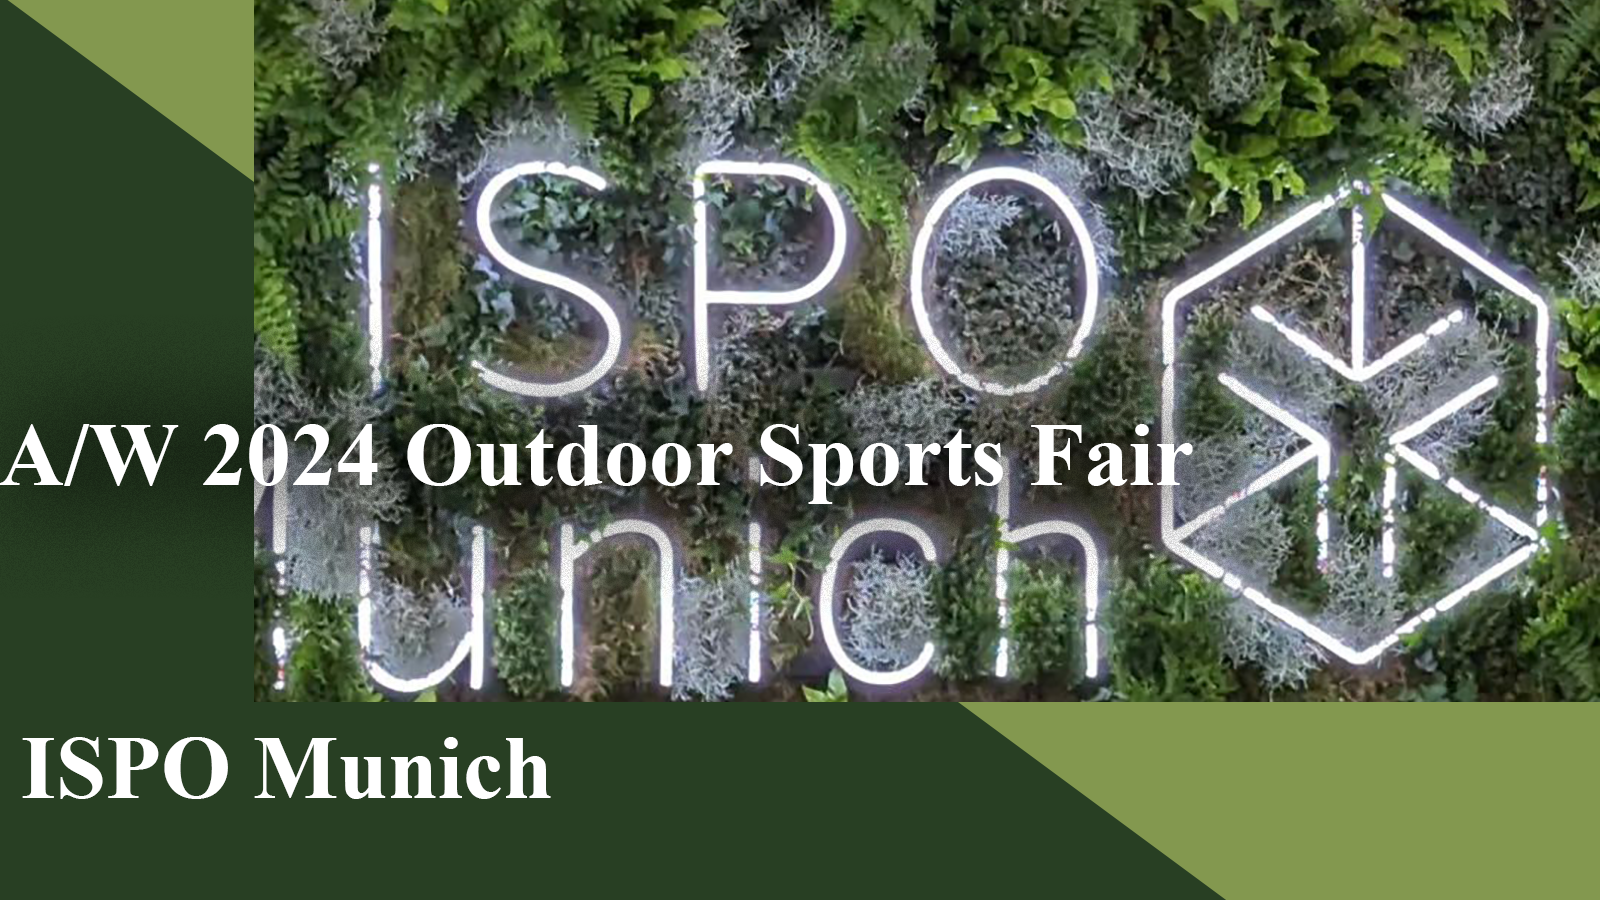 The Analysis of Outdoor Sports Fair ISPO Munich